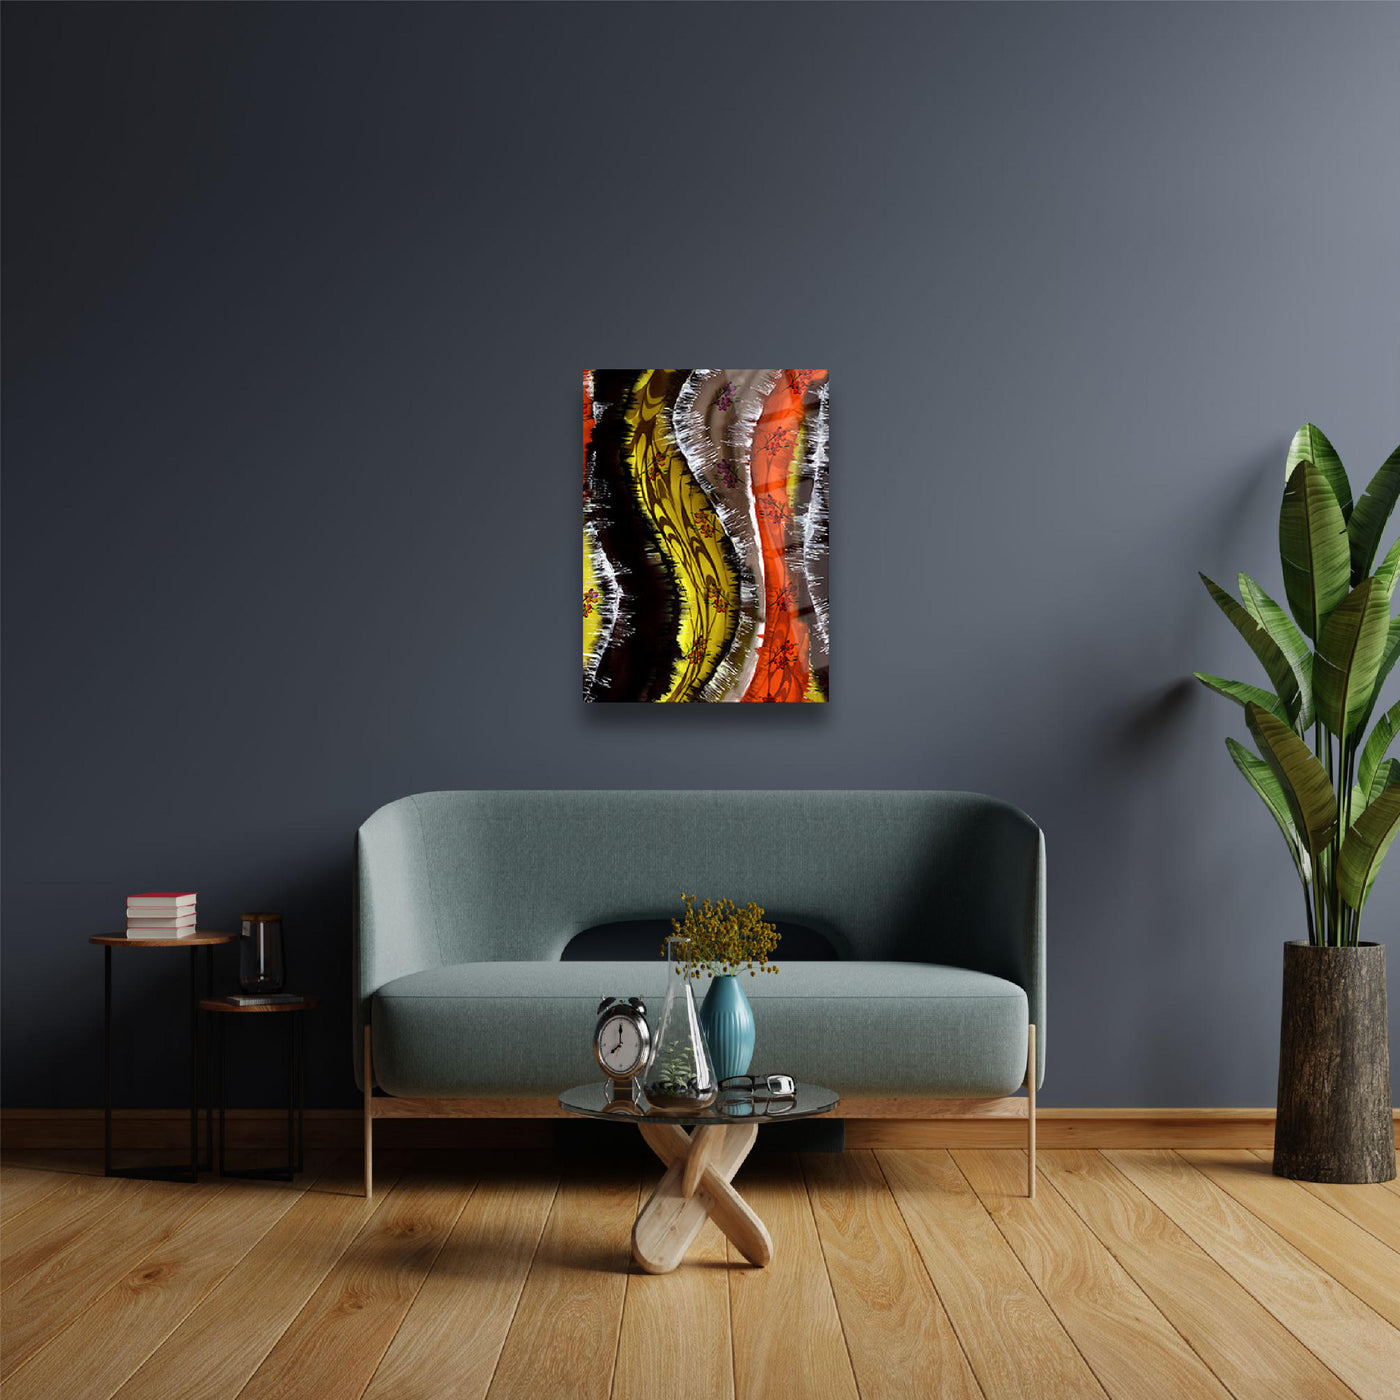 Colorful Waves Wall Decor